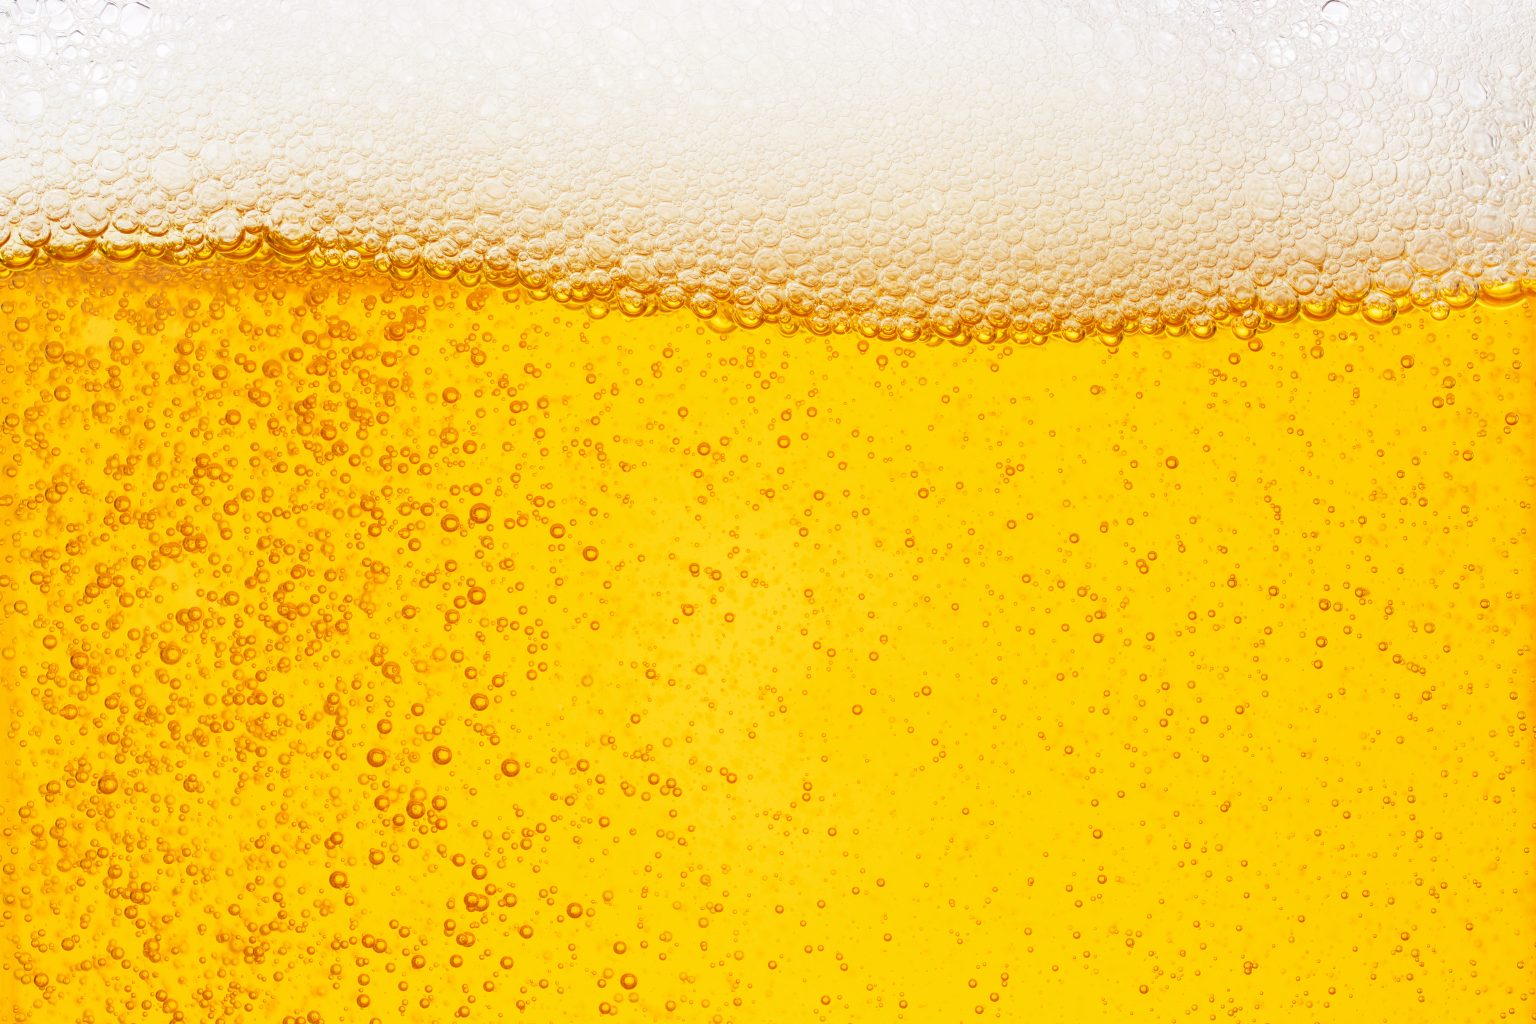 BeerBots could speed up the brewing process, researchers claim